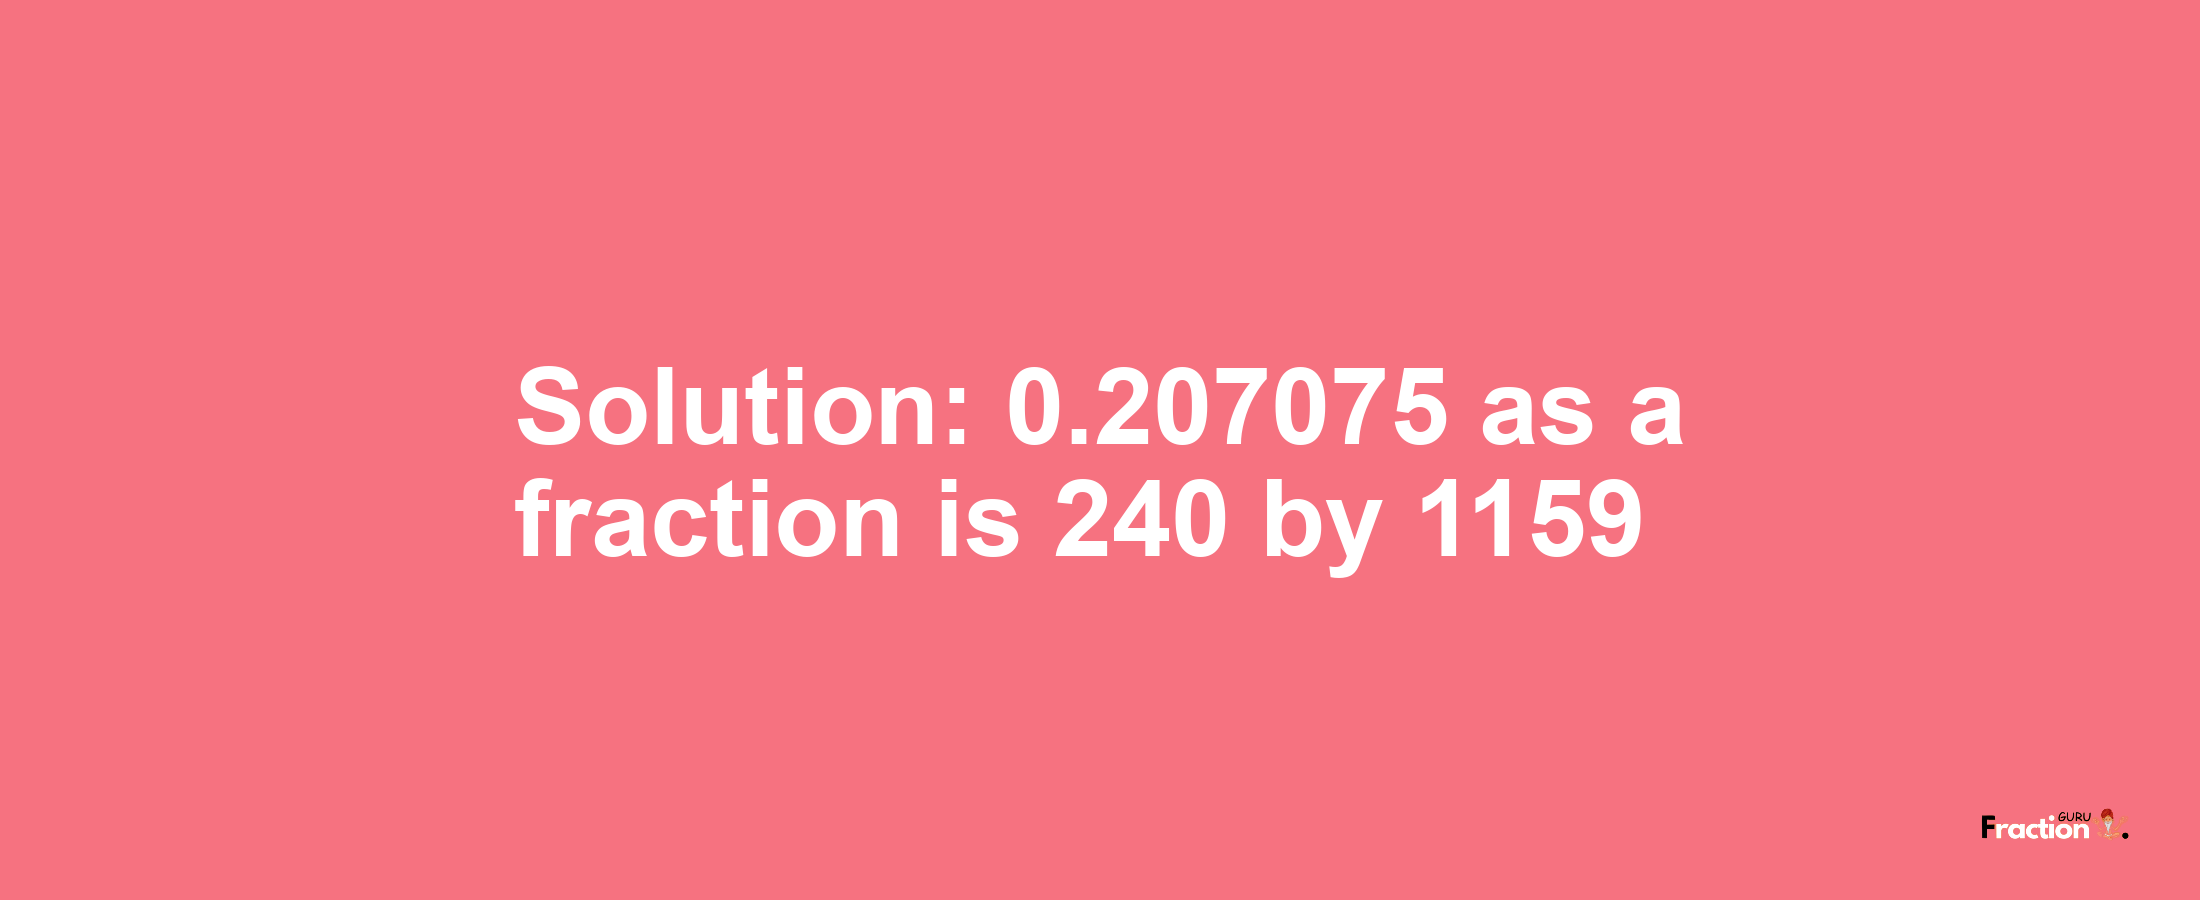 Solution:0.207075 as a fraction is 240/1159